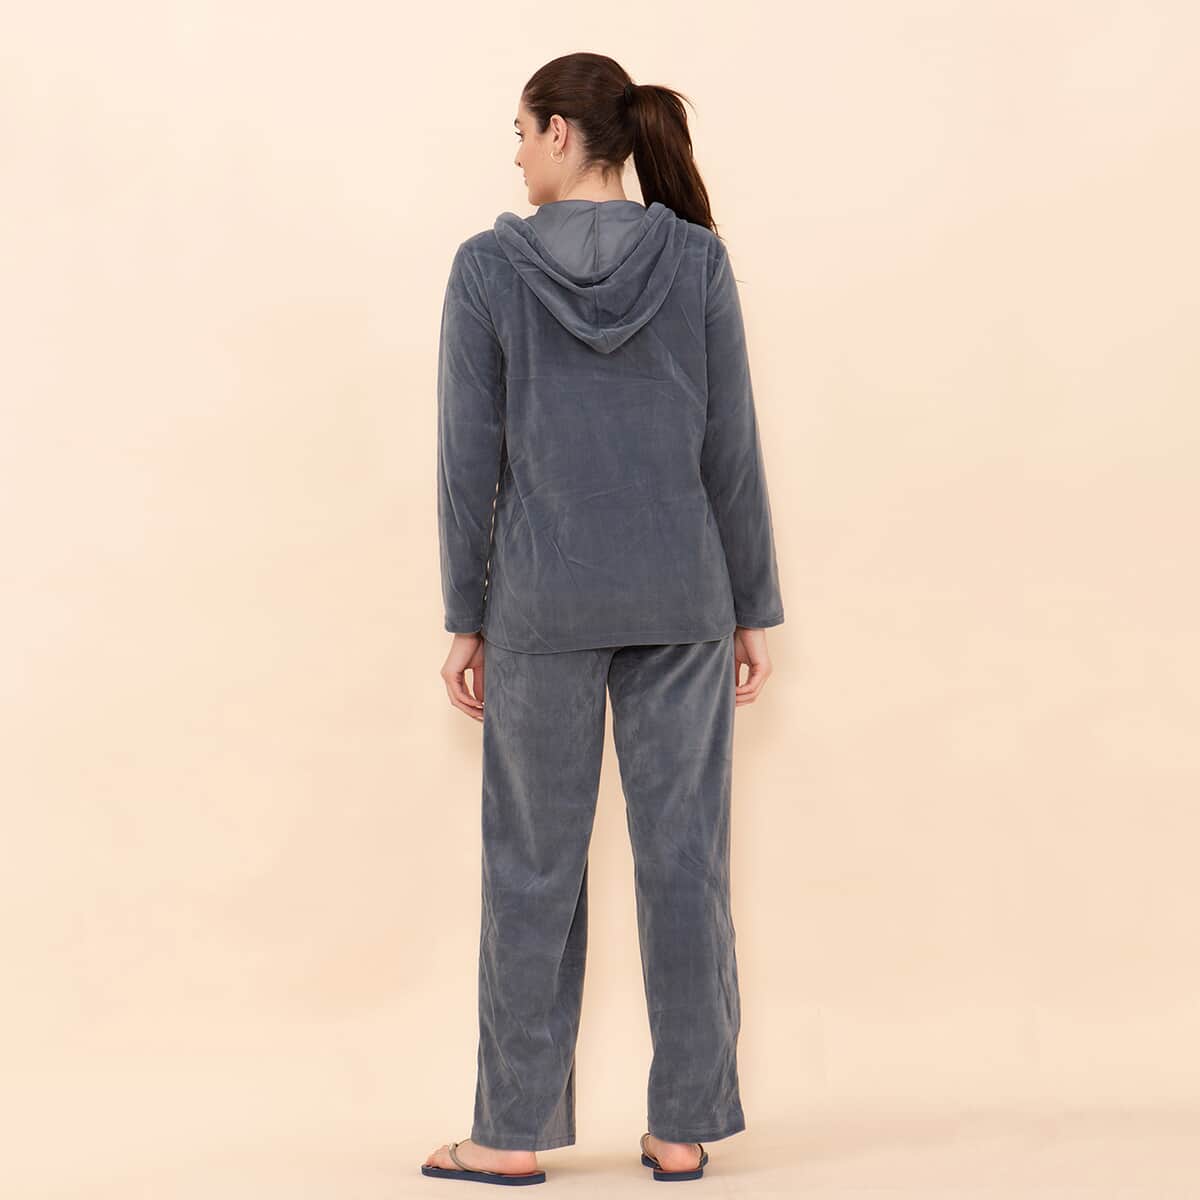 Tamsy LUX Gray Velour Track Suit Set - L image number 1